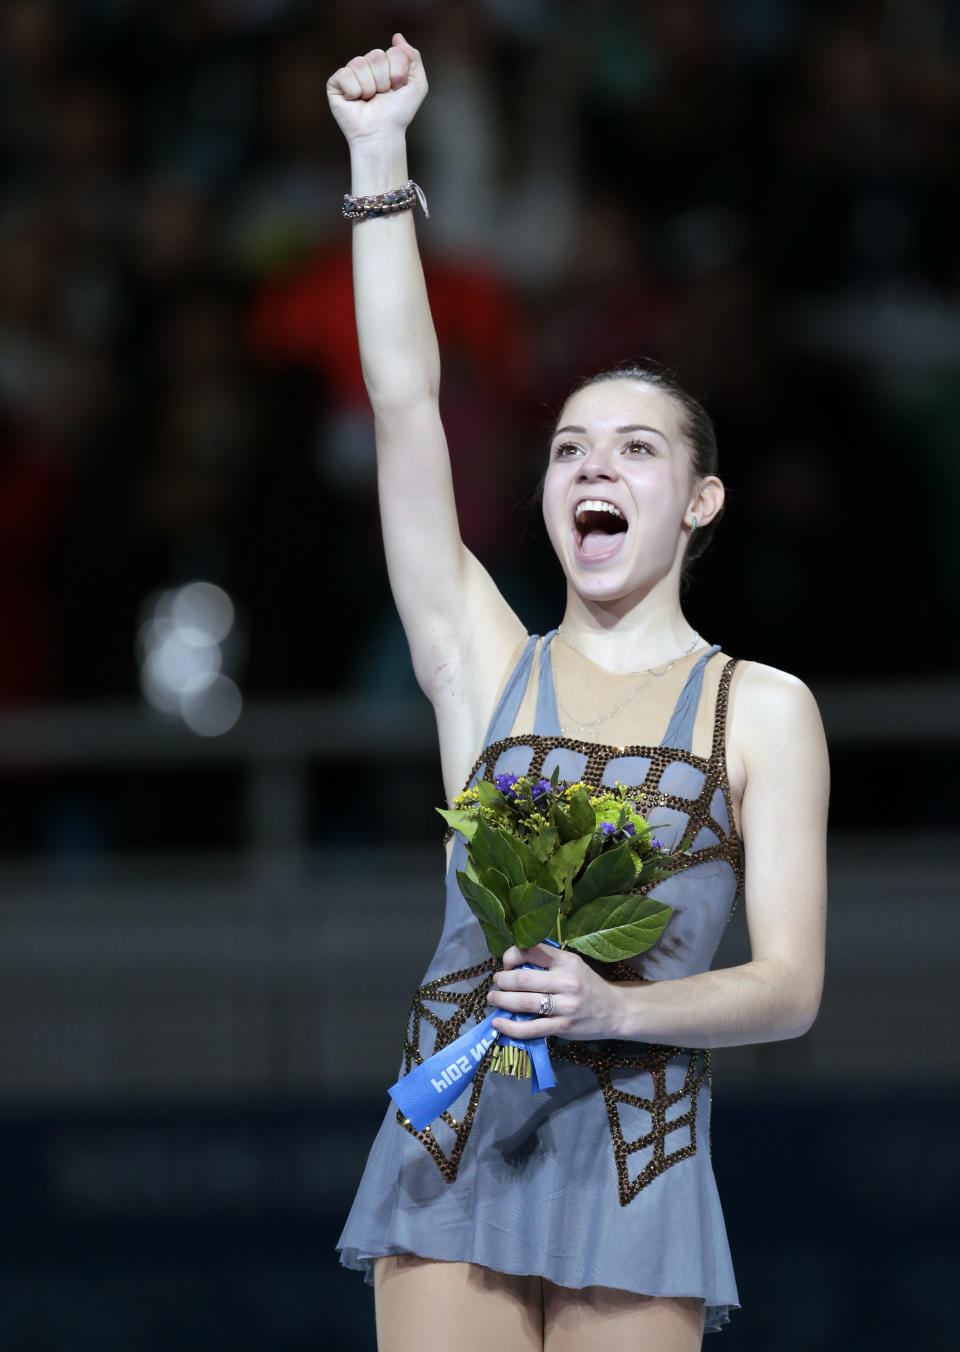 Adelina Sotnikova of Russia celebrates her first place as she stands on the podium during the flower ceremony for the women's free skate figure skating finals at the Iceberg Skating Palace during the 2014 Winter Olympics, Thursday, Feb. 20, 2014, in Sochi, Russia. (AP Photo/Ivan Sekretarev)